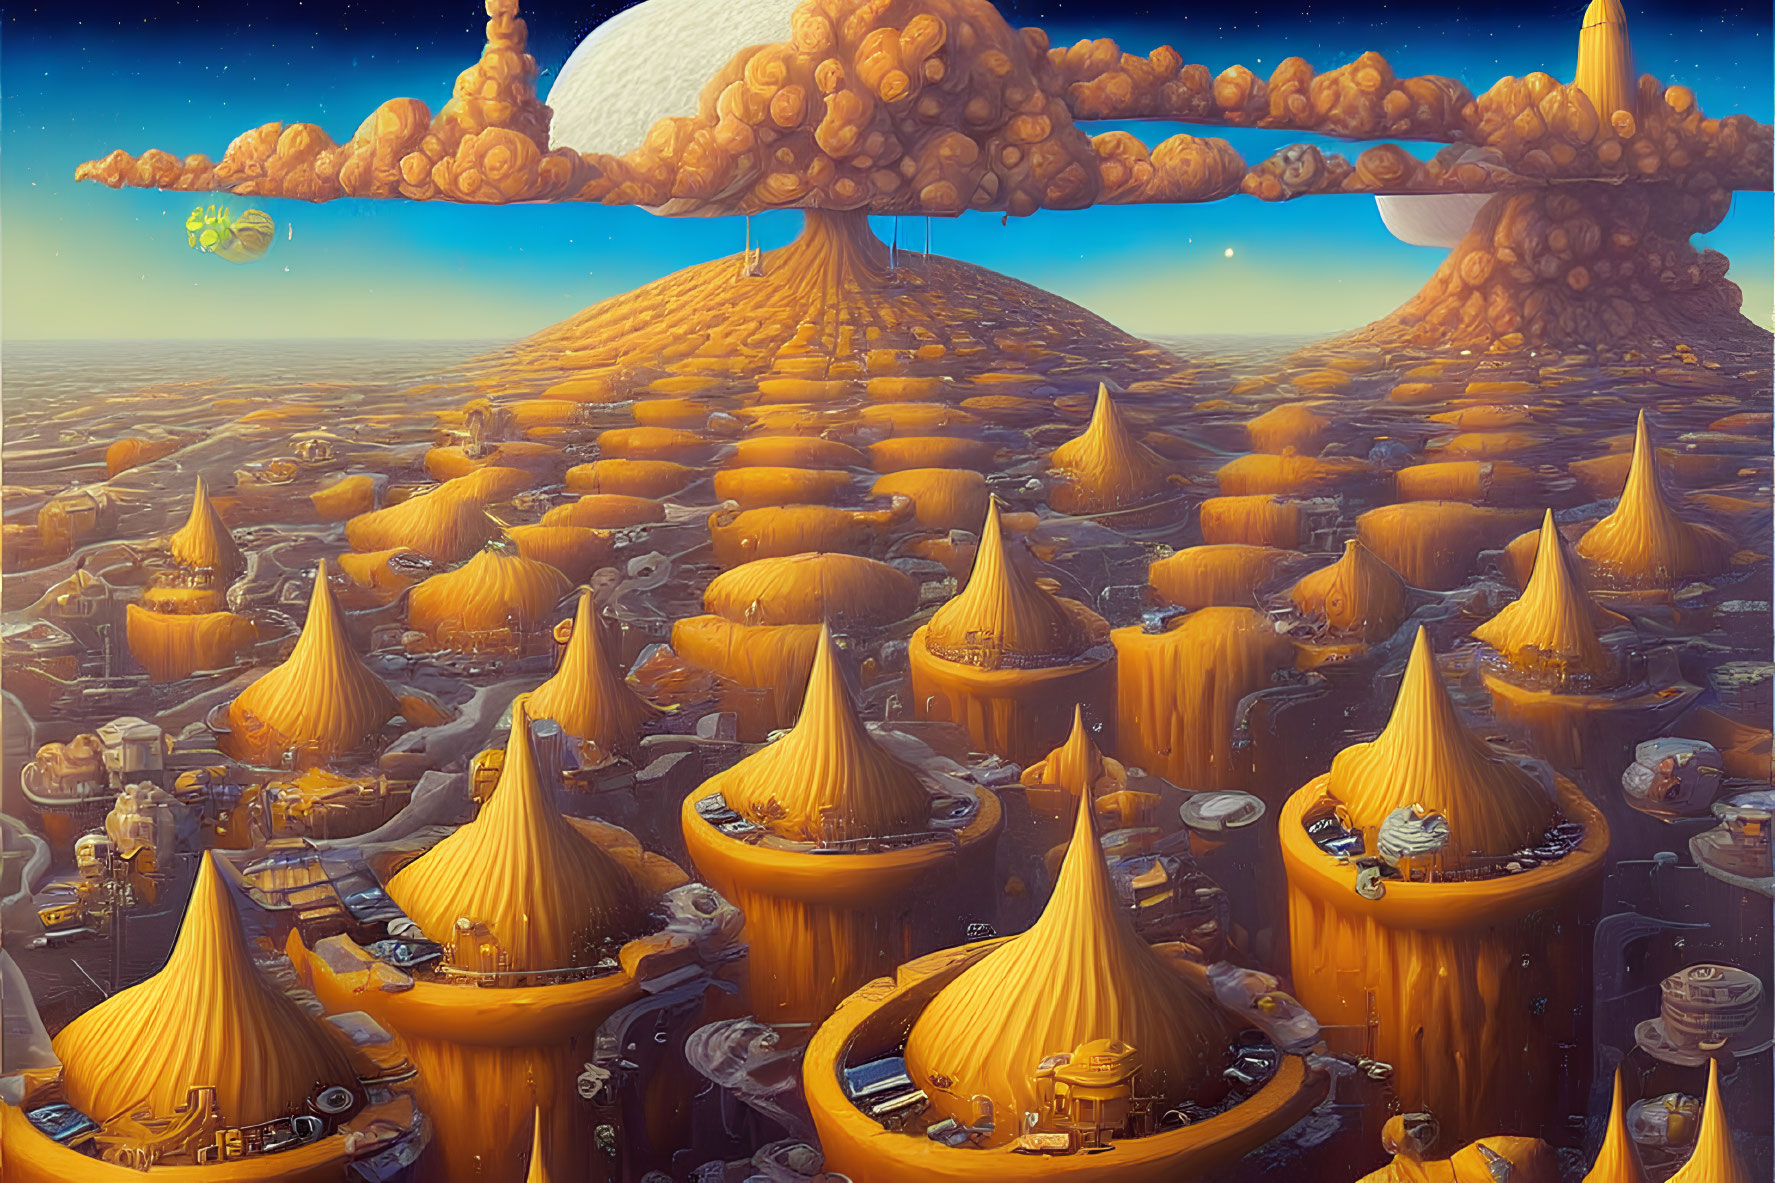 Fantastical landscape with orange conical structures and flying vehicles